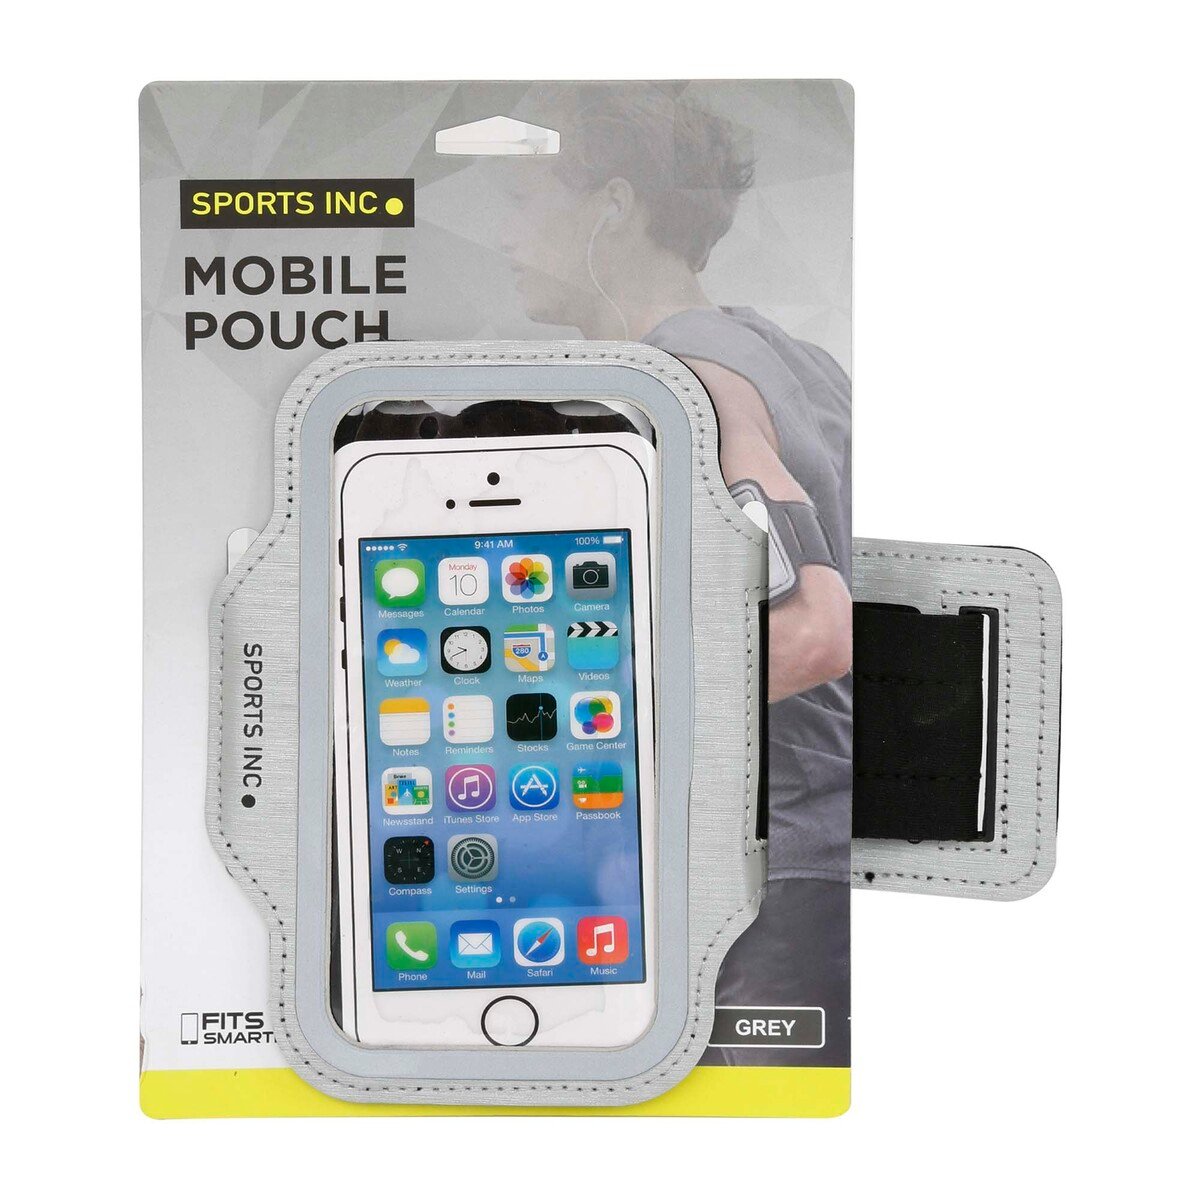 Sports Inc Mobile Pouch, LS3720